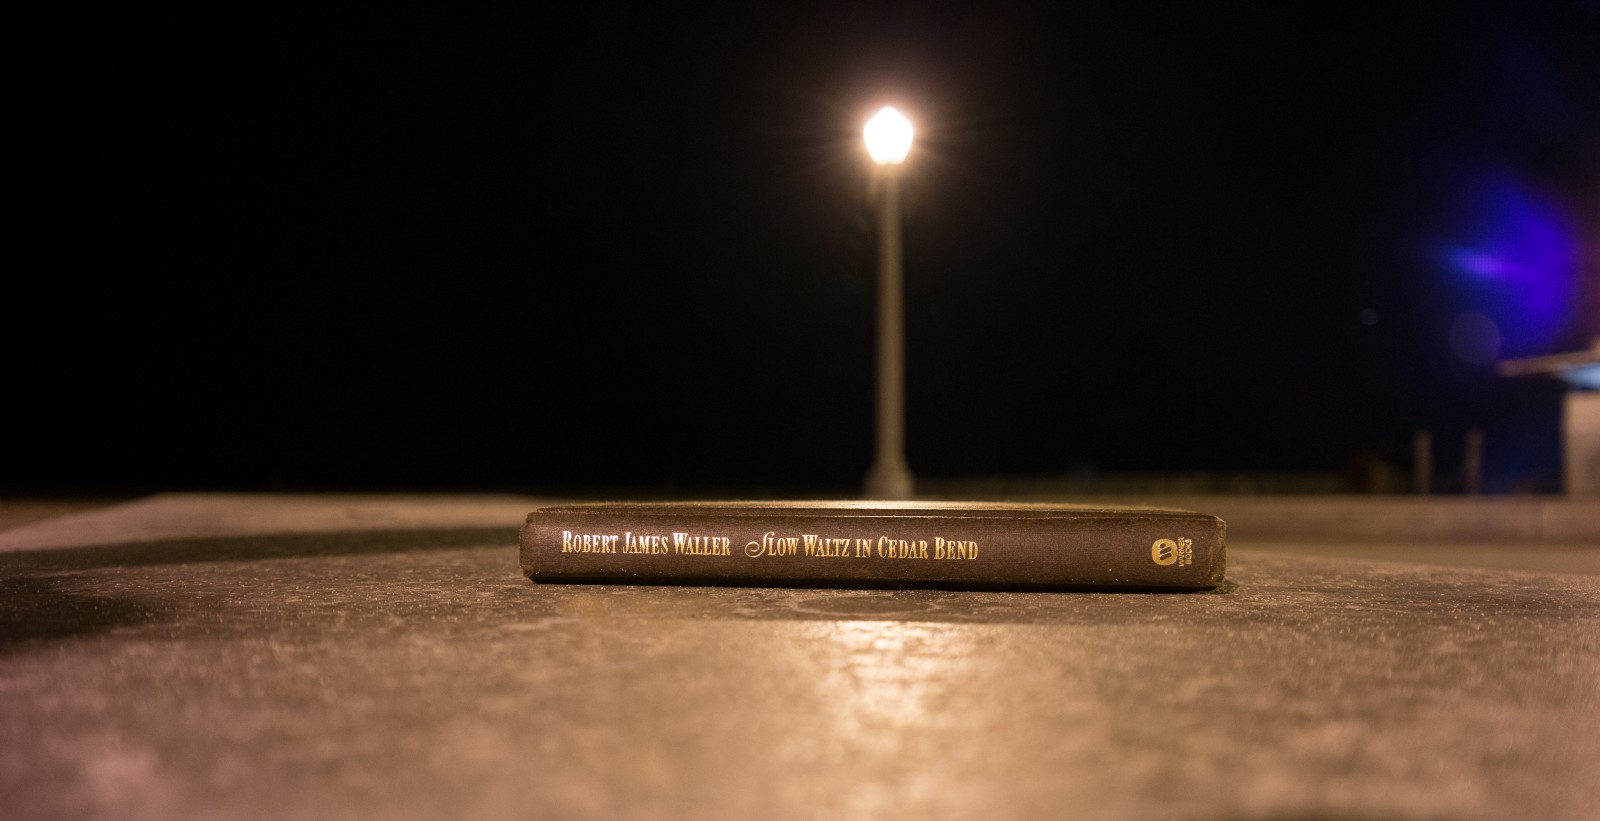 Photo of a book on the ground